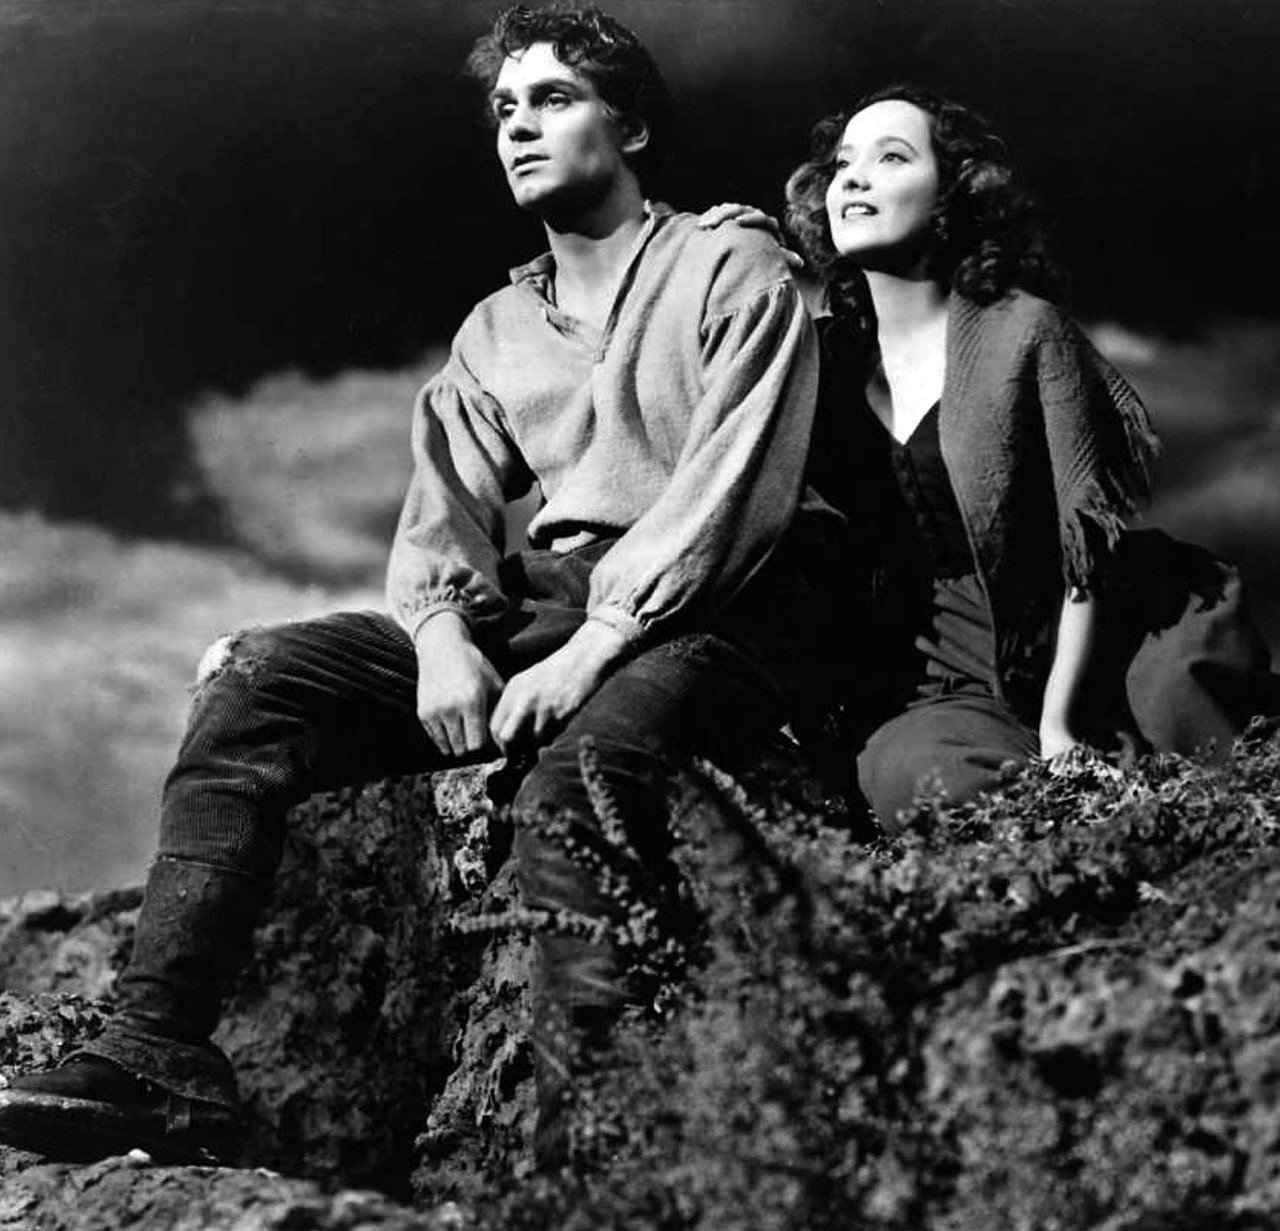 Laurence Olivier, with Merle Oberon in the 1939 film "Wuthering Heights" | Photo: Wikimedia Commons Images